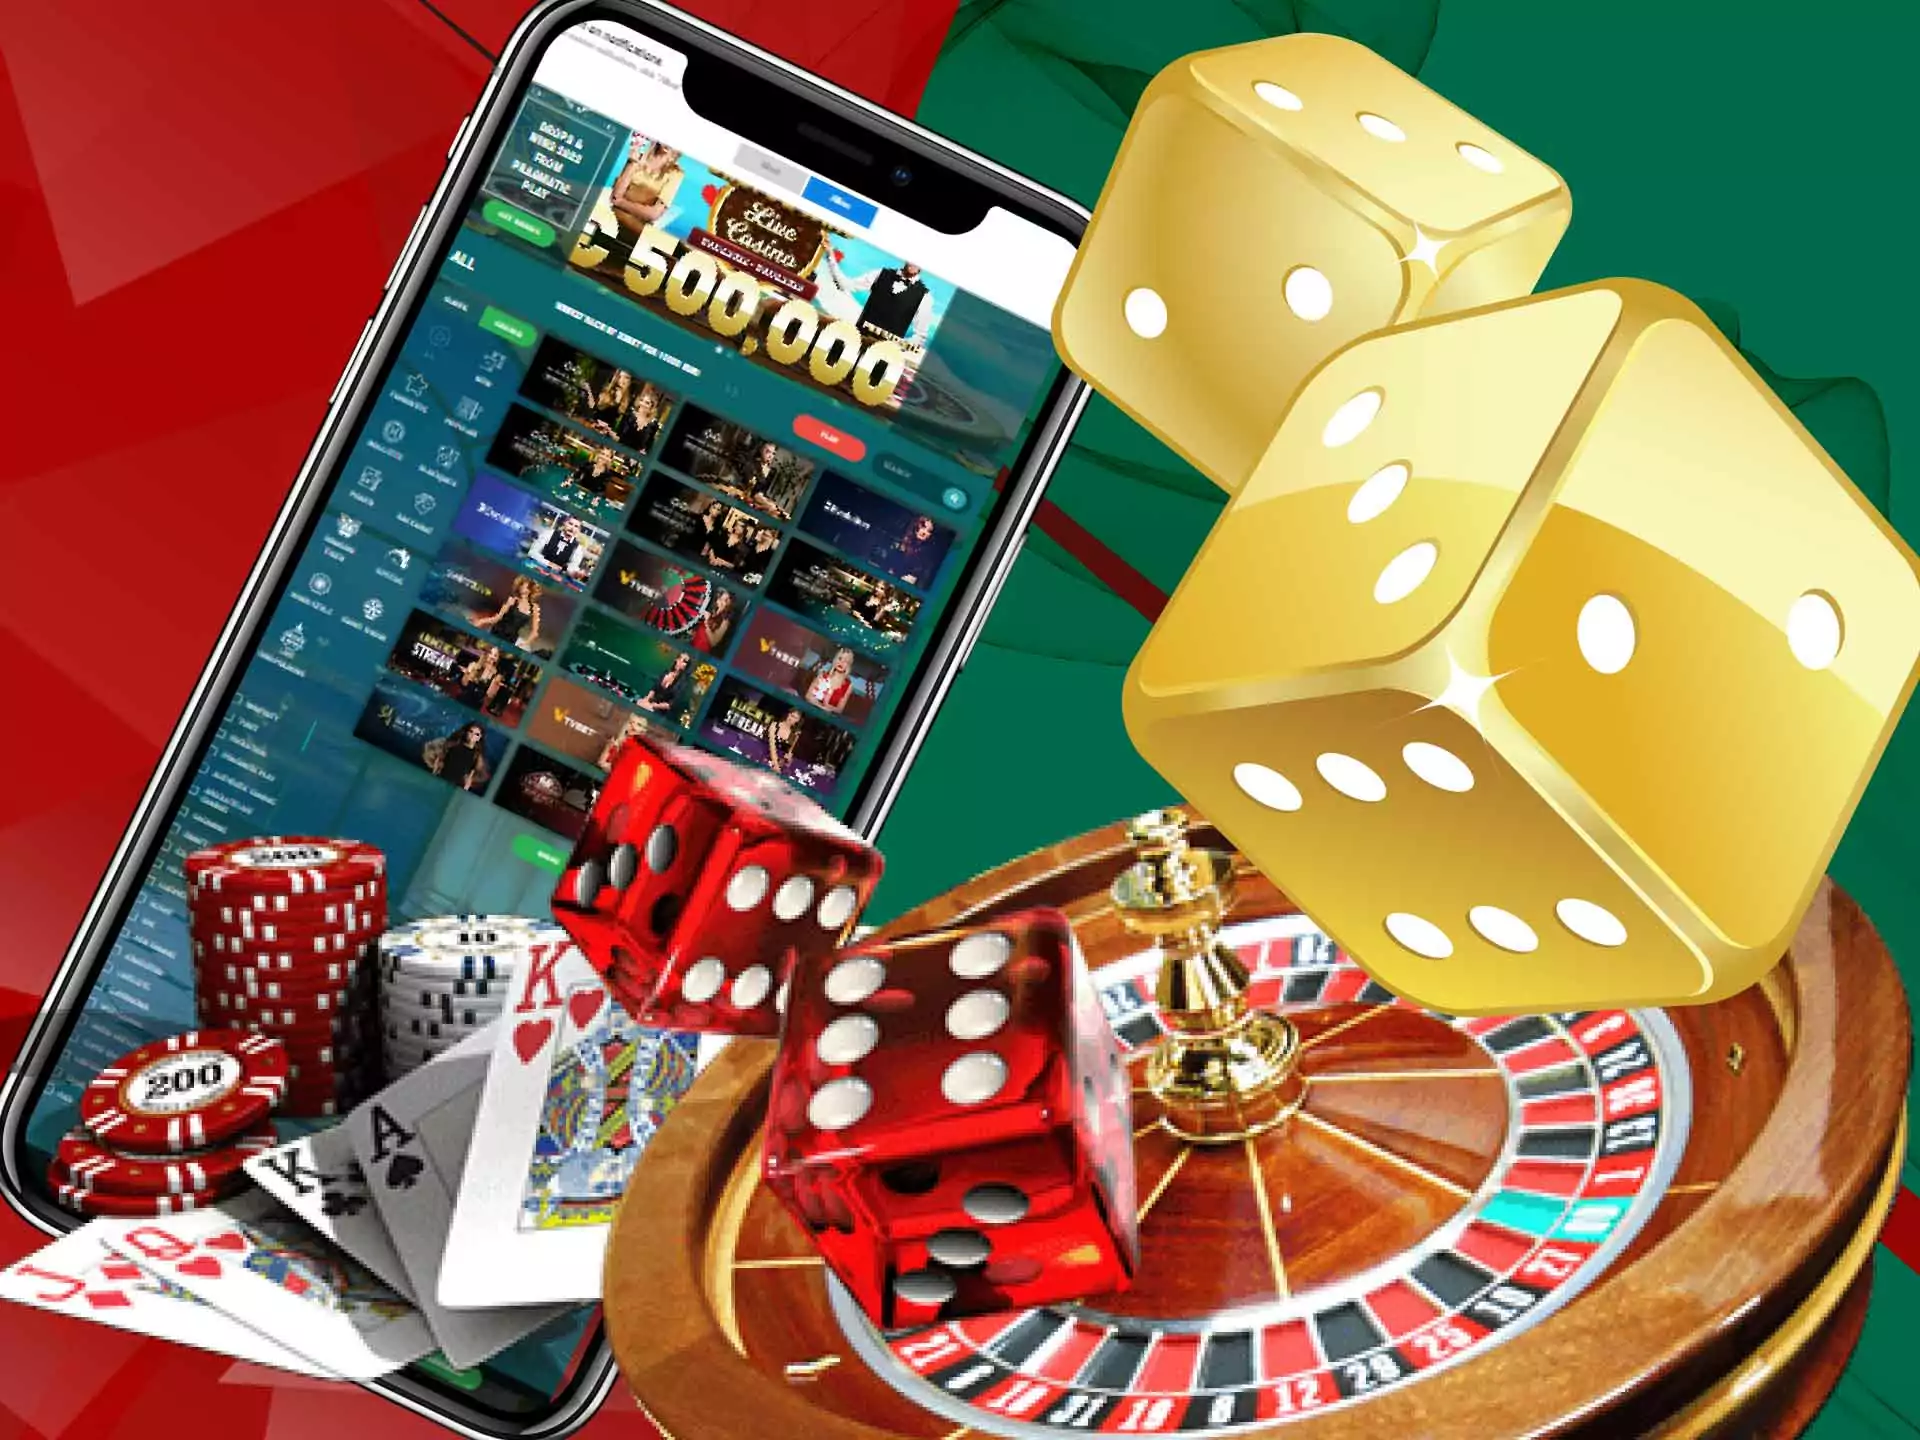 22Bet also offers the online casino games.